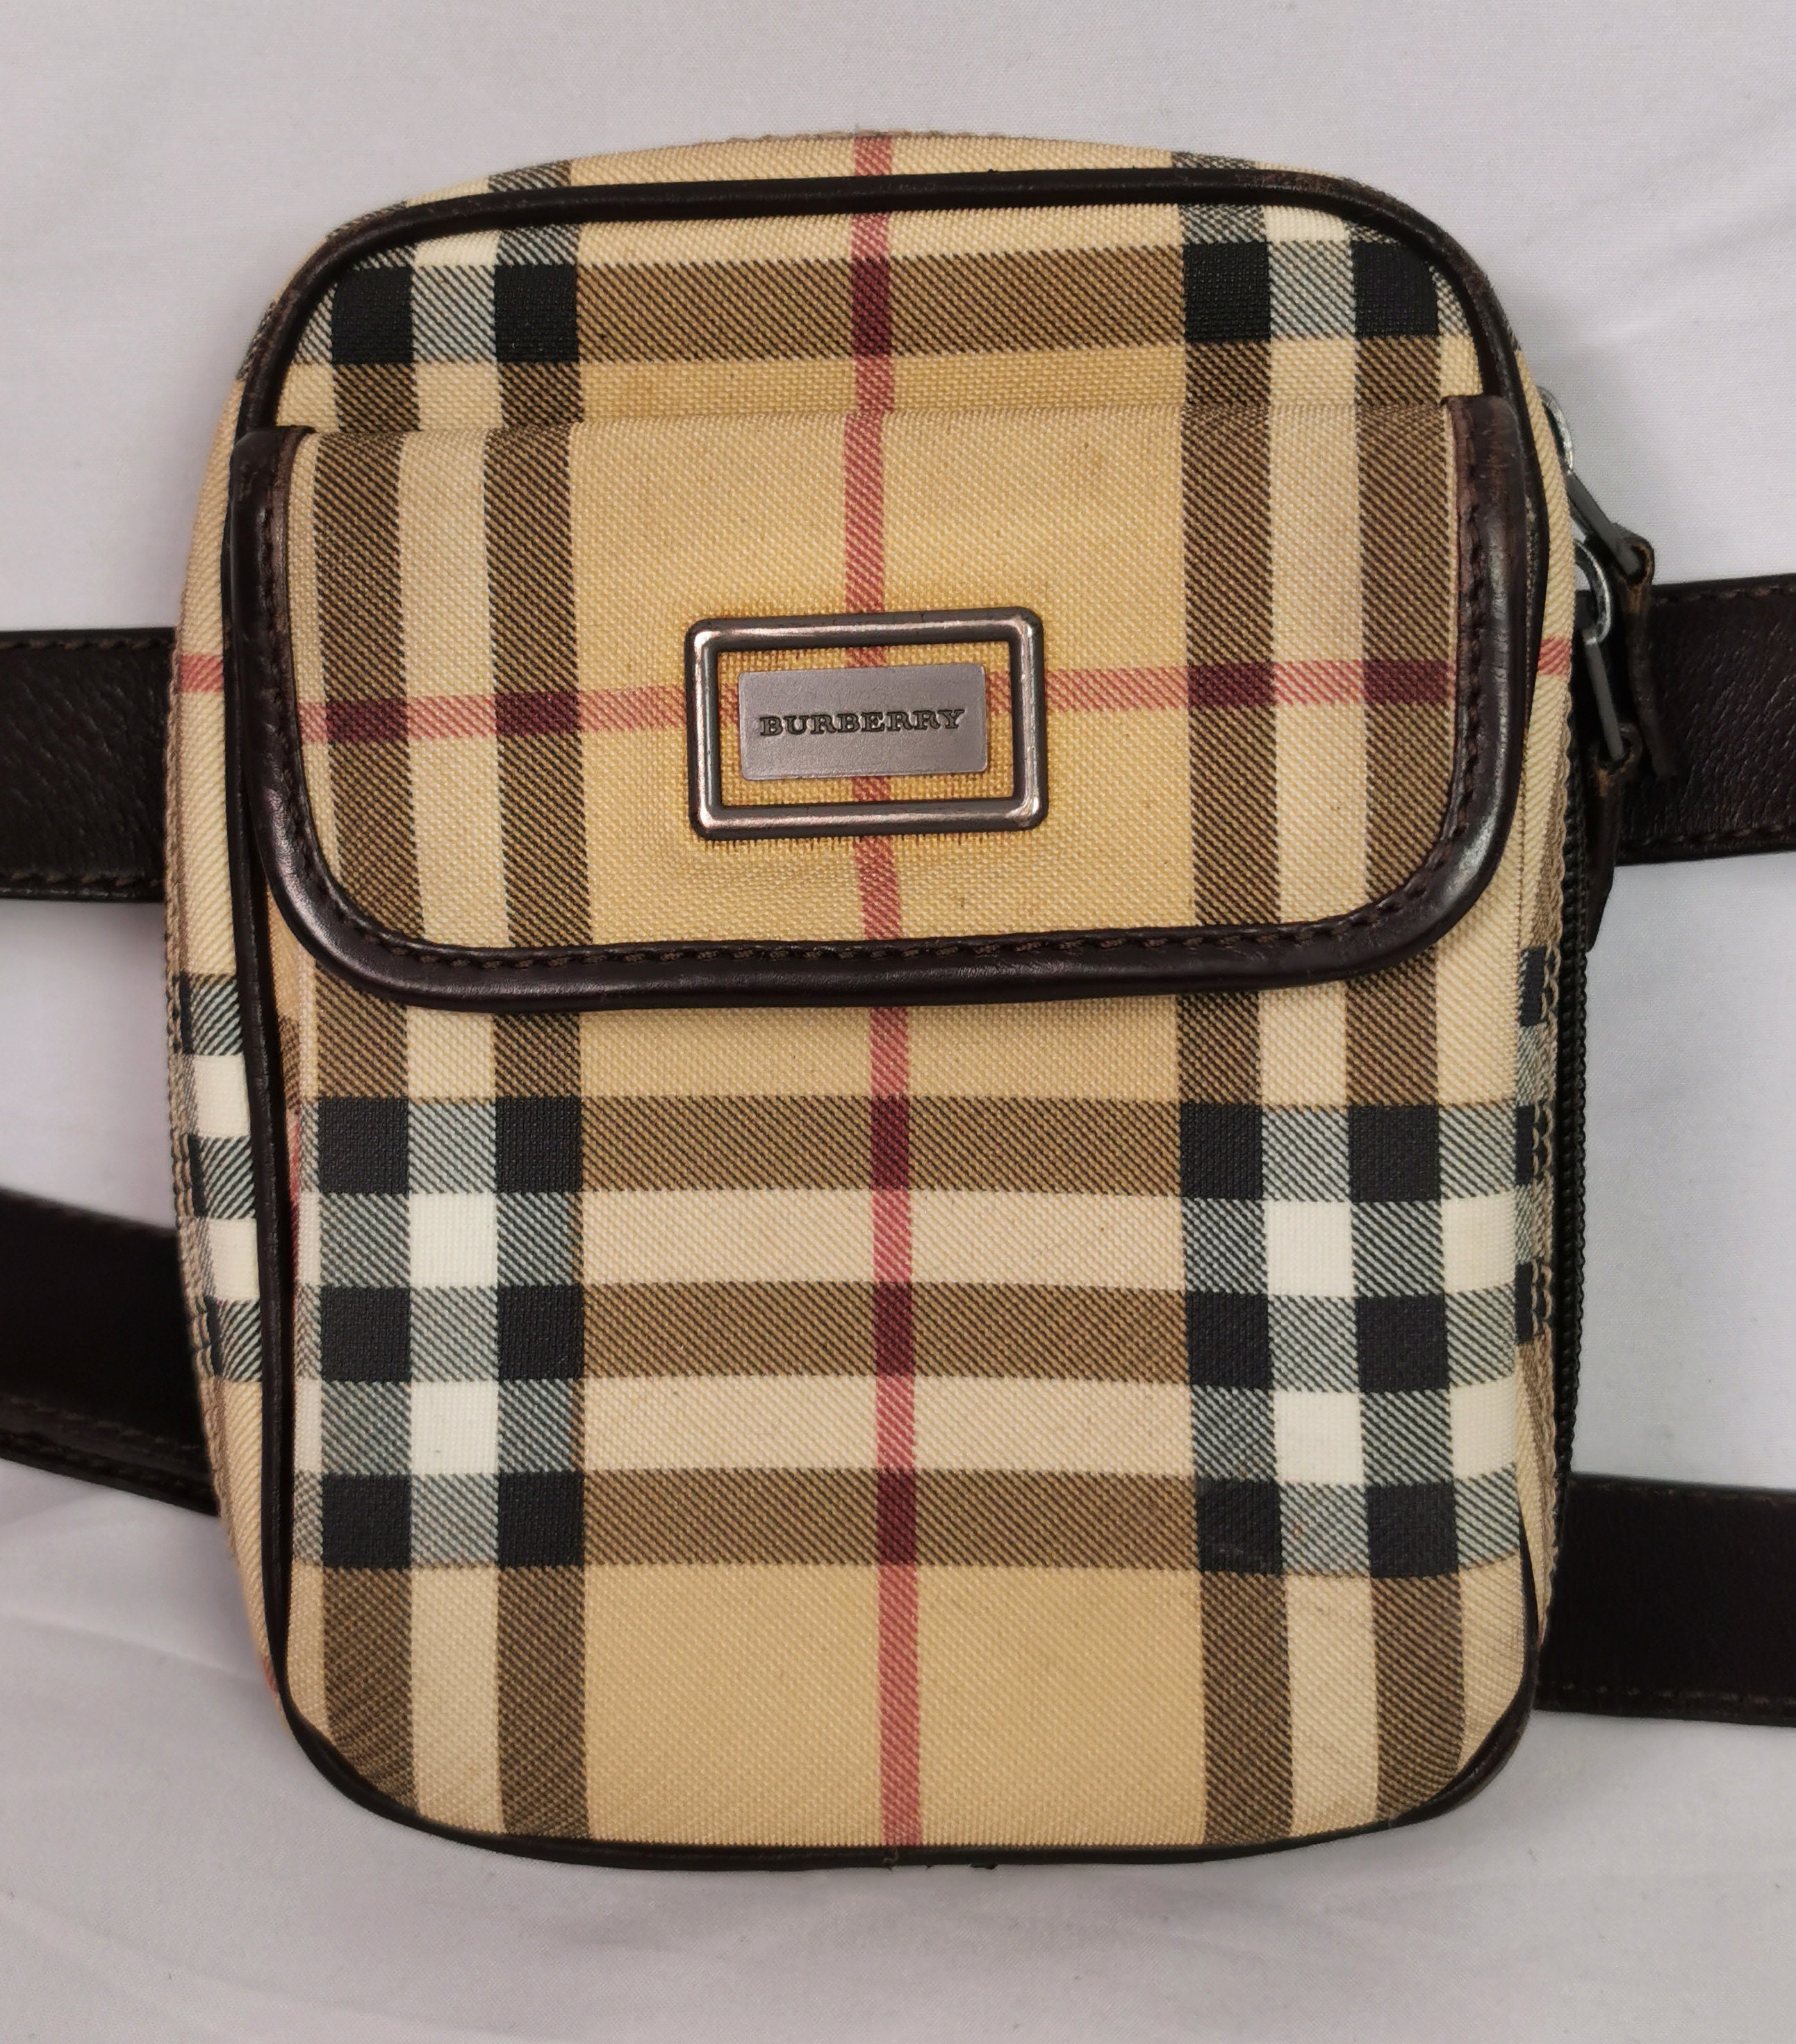 Buy Burberry Leather Bag Online In India -  India